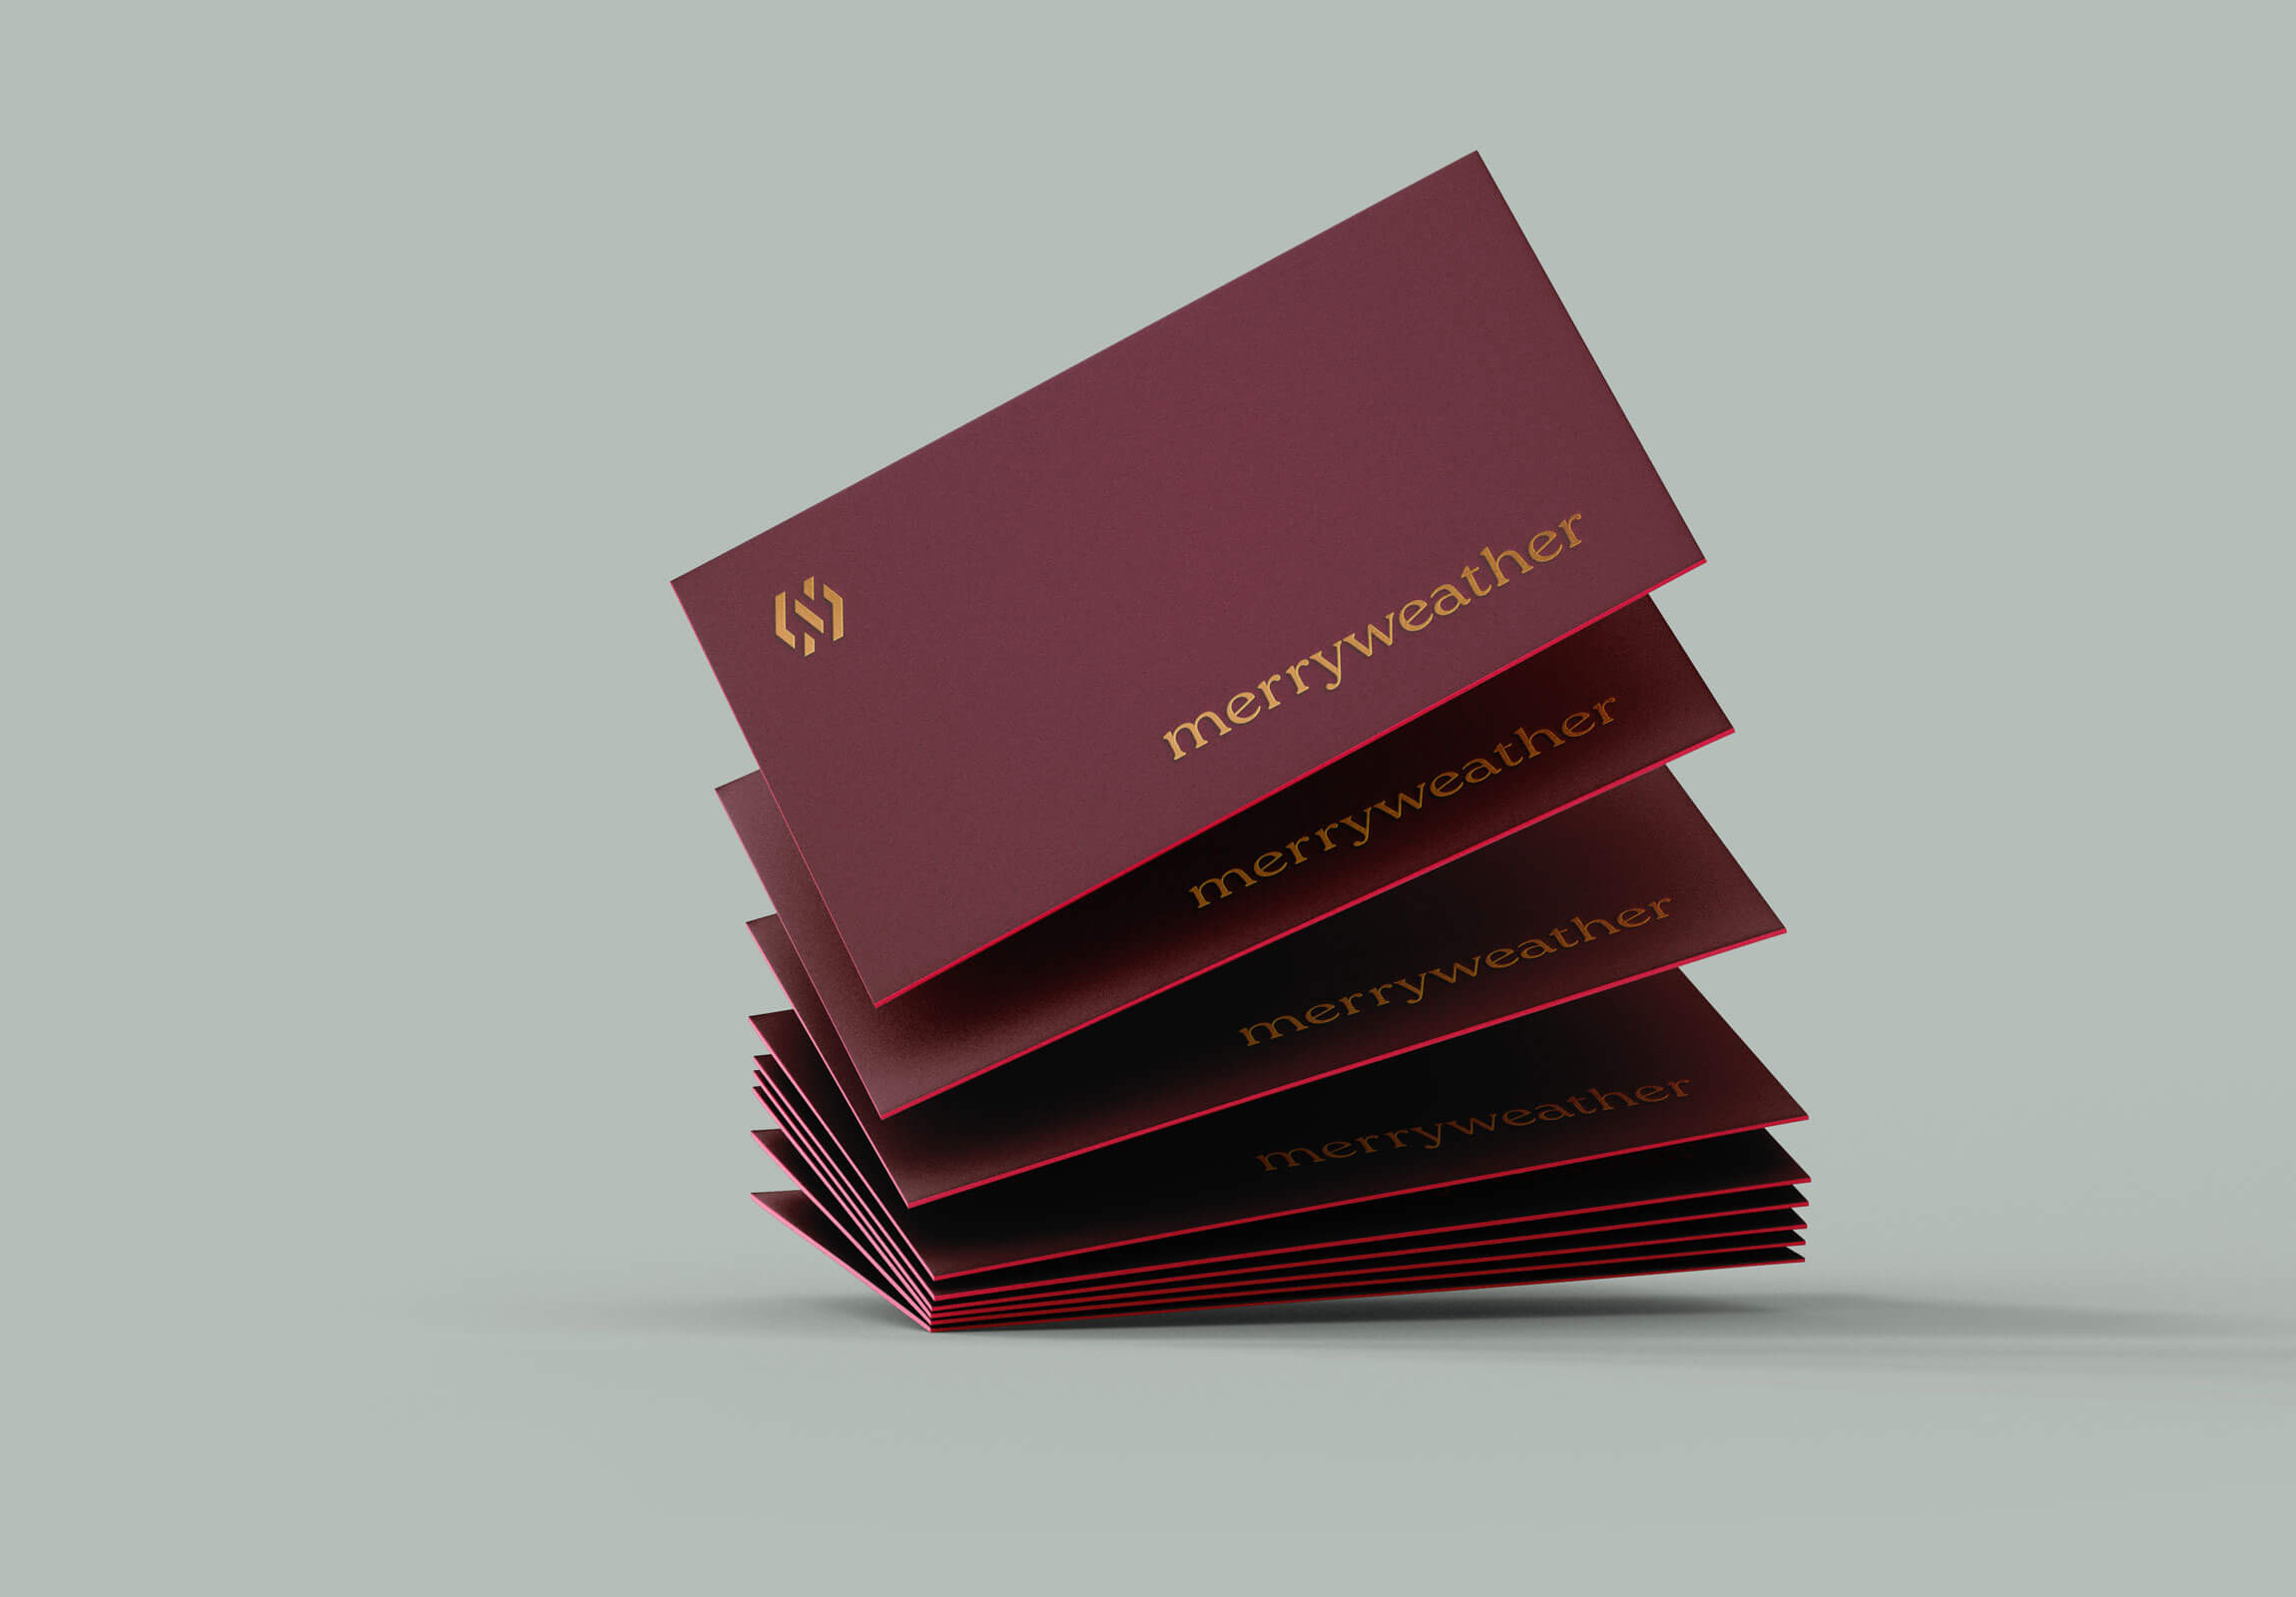 Merryweather Law Set Out to Gently Disrupt the Legal Industry — Unveils Strategic Brand Design by Petchy